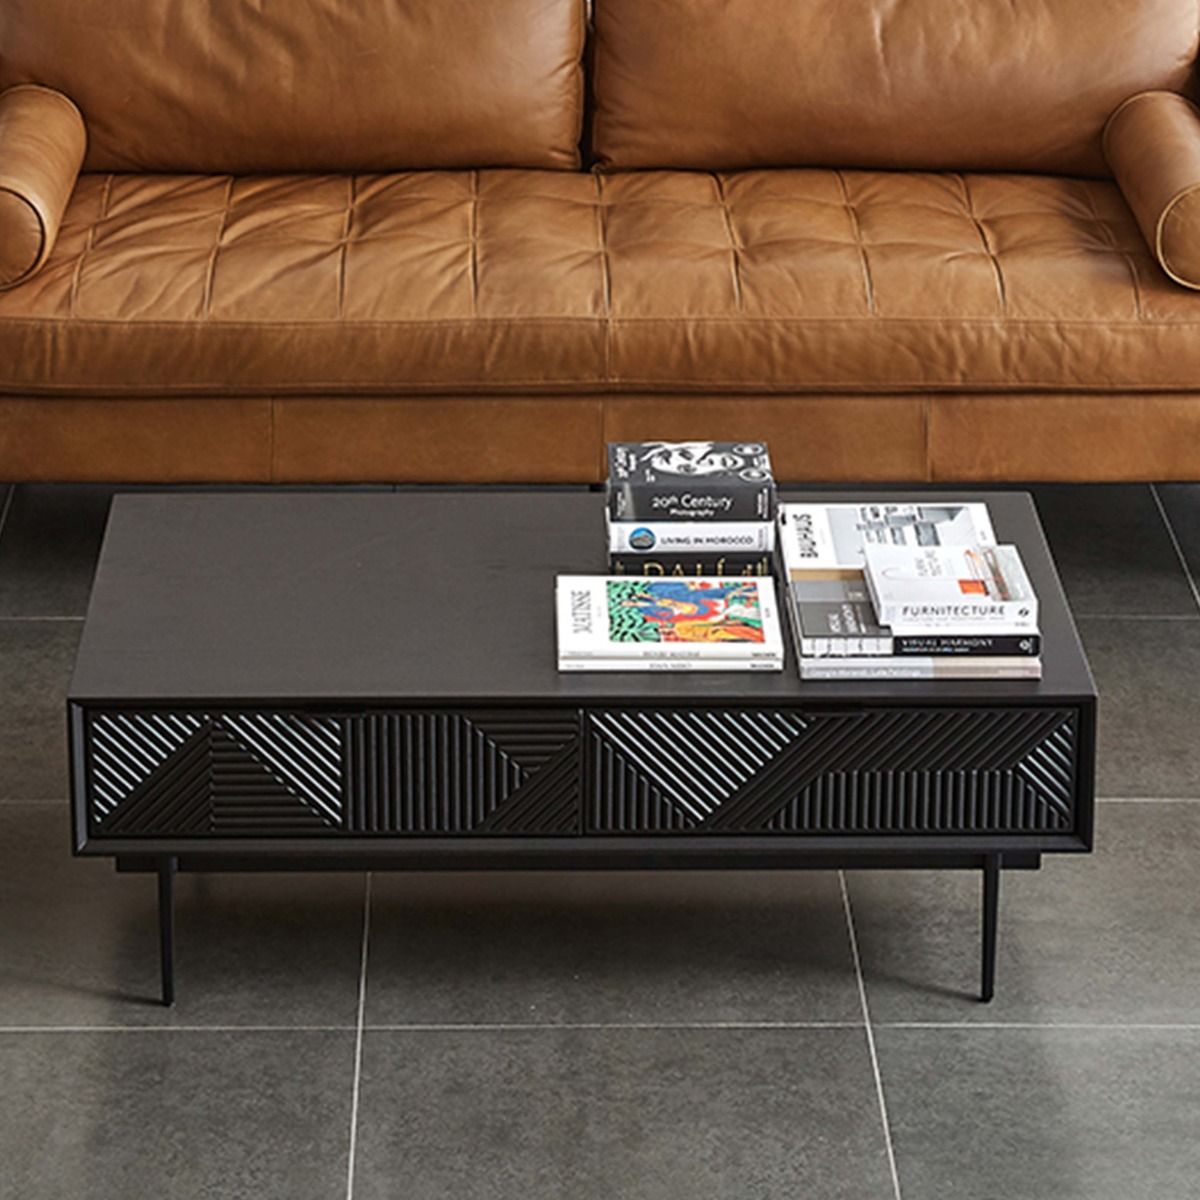 Modern Semi-Open Coffee Table With Storage -Buy Now & Get Free Shipping! Black